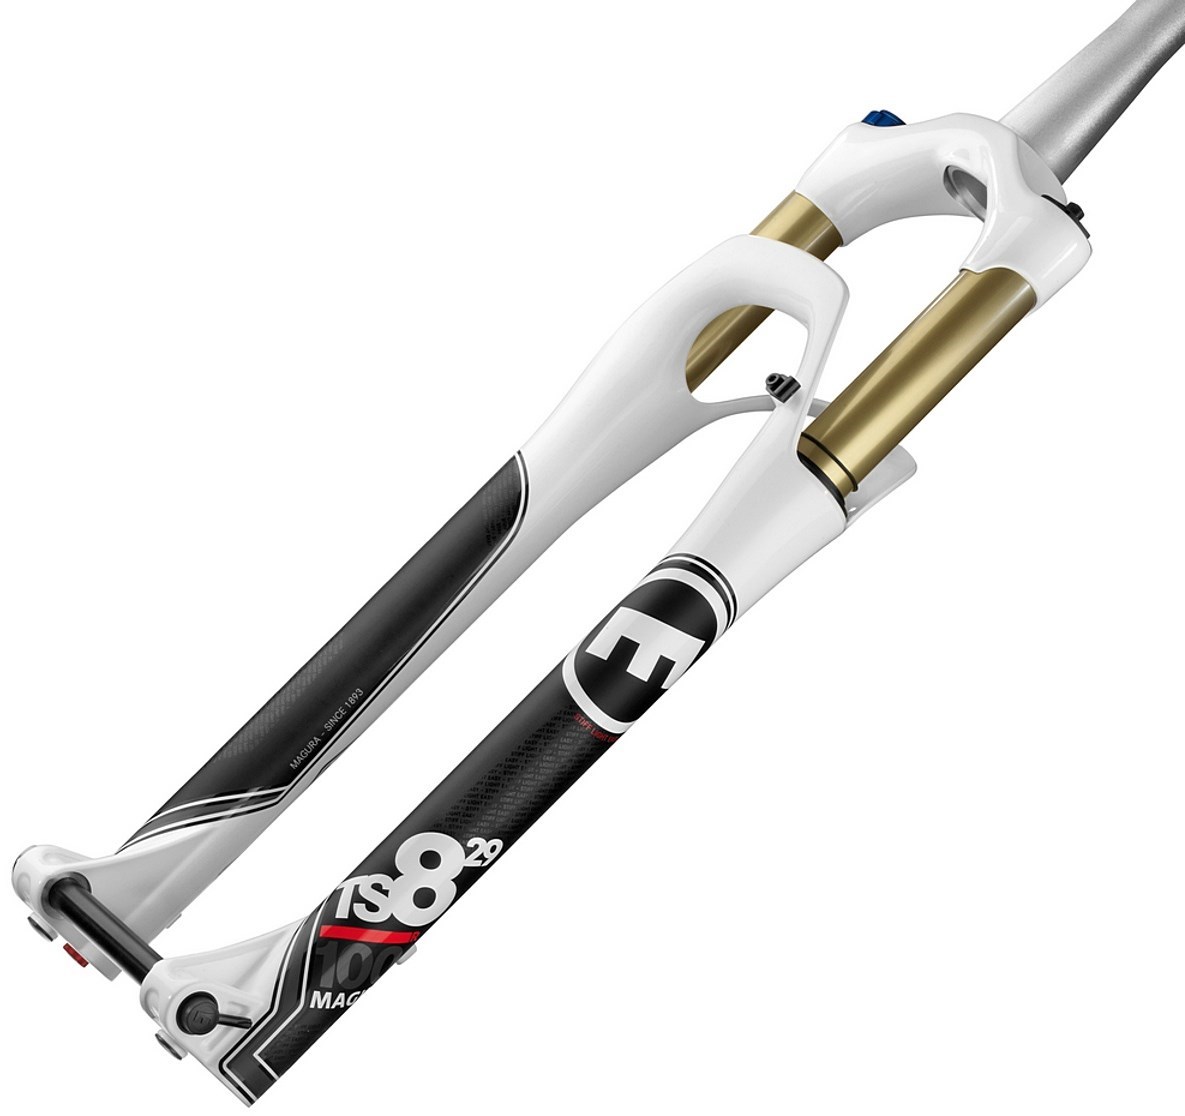 Magura TS8 R 120 Tapered 29er 29 inch Suspension Fork 2013 product image